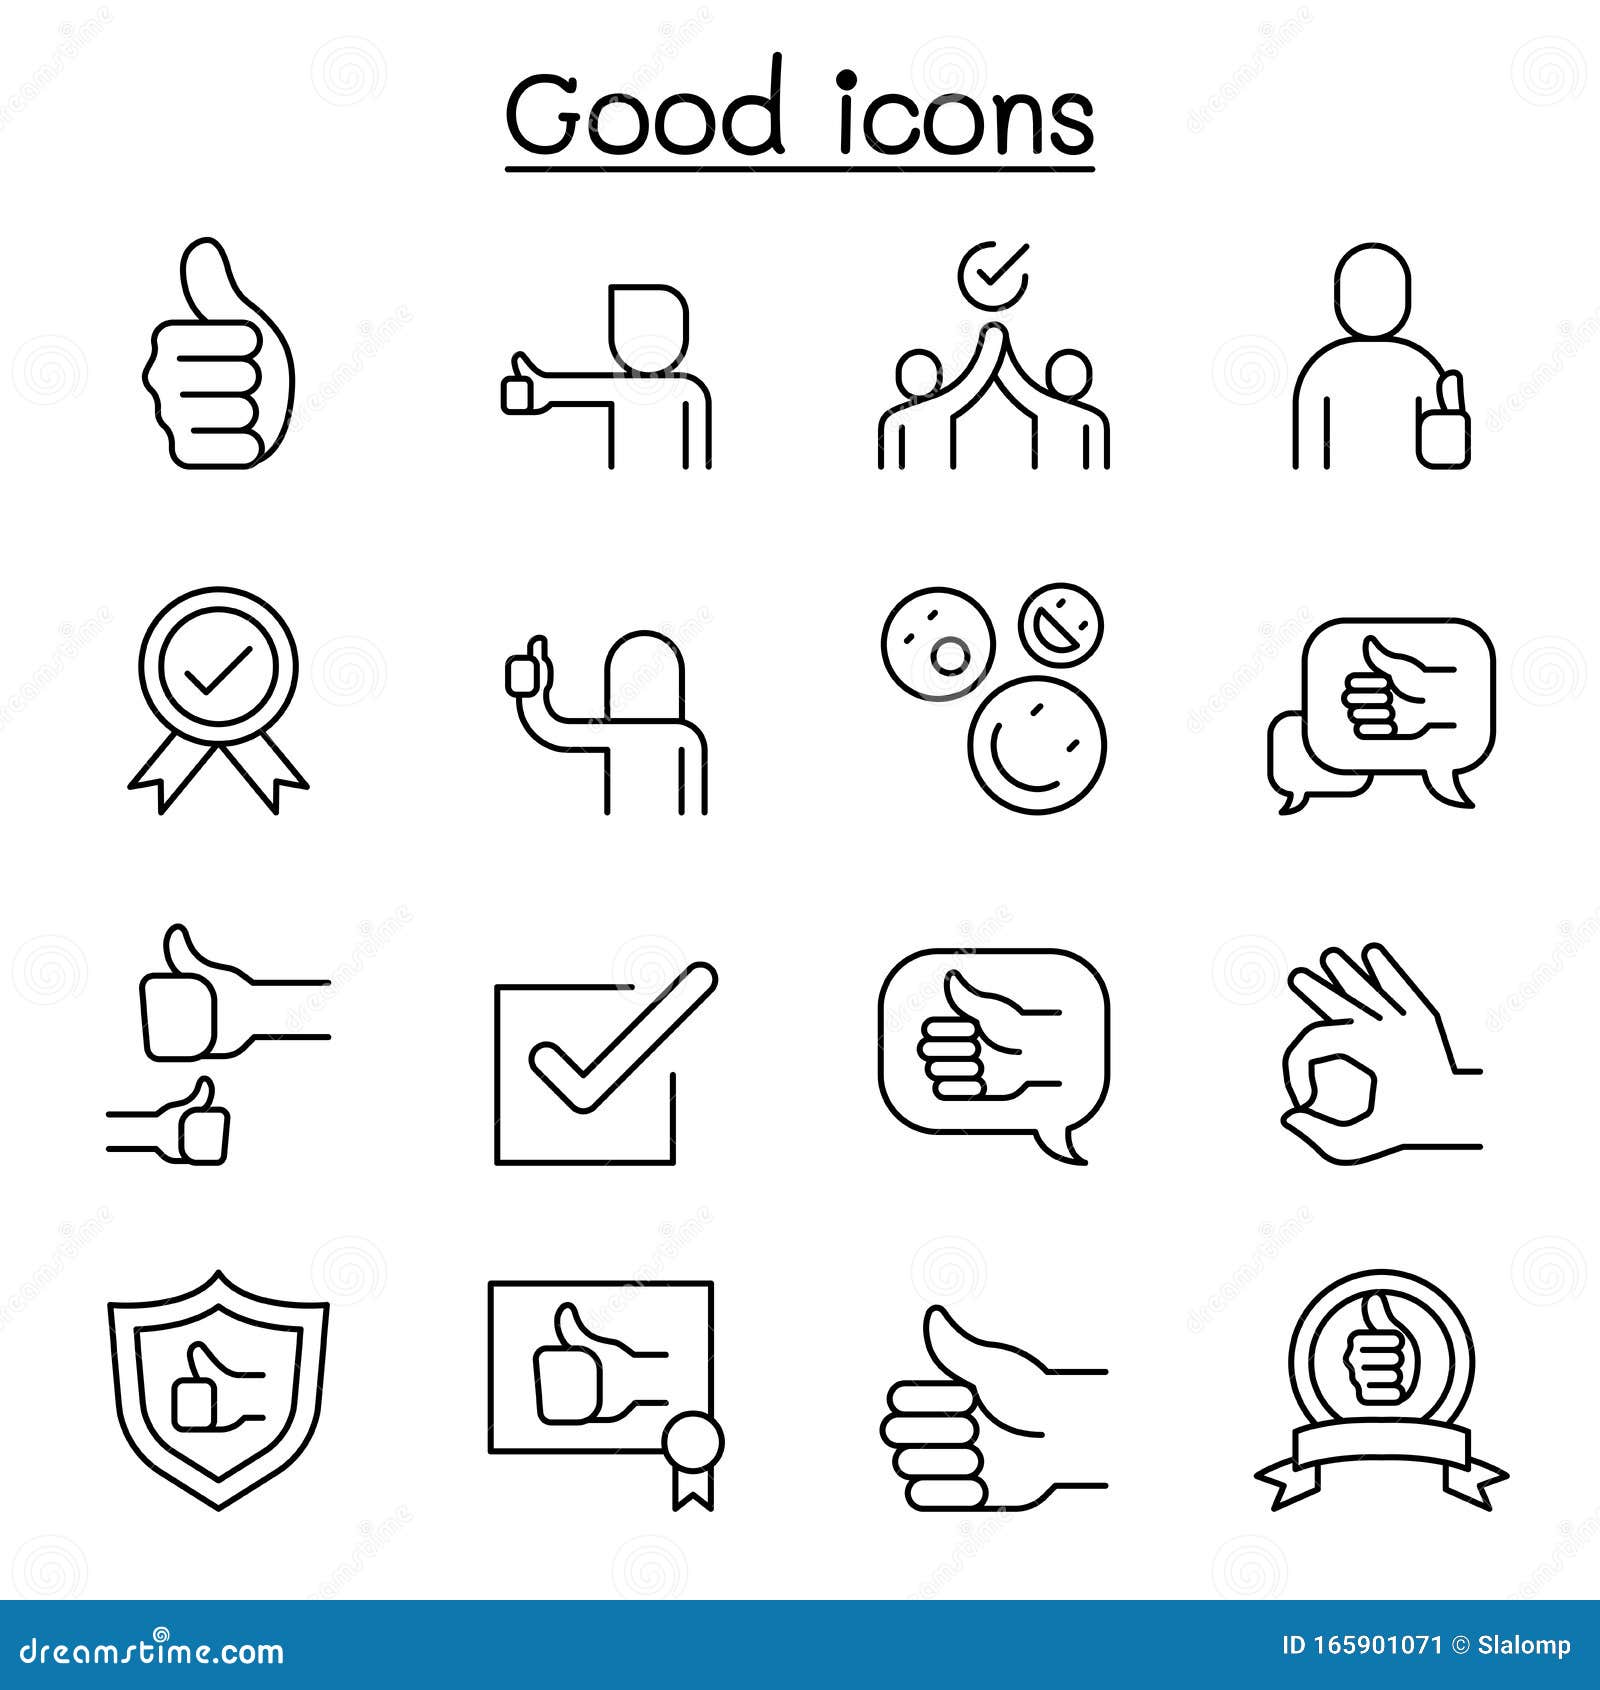 good, approve, confirm, verify, quality icon set in thin line style